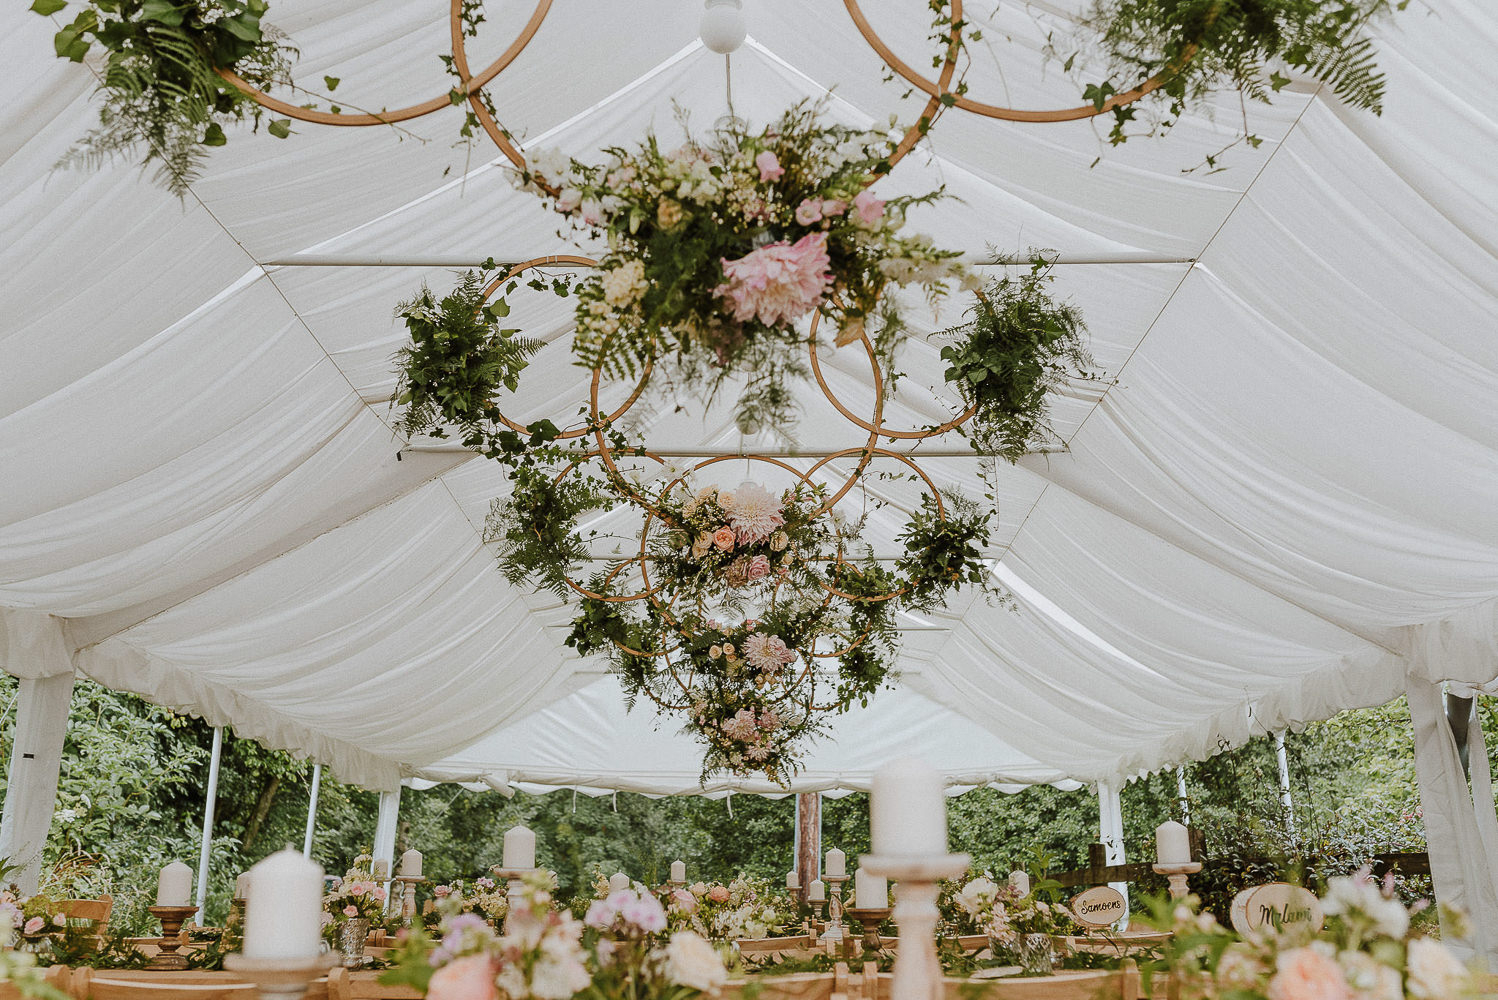 Rustic Wedding With Flower Hoop Decor At Streamcombe Farm